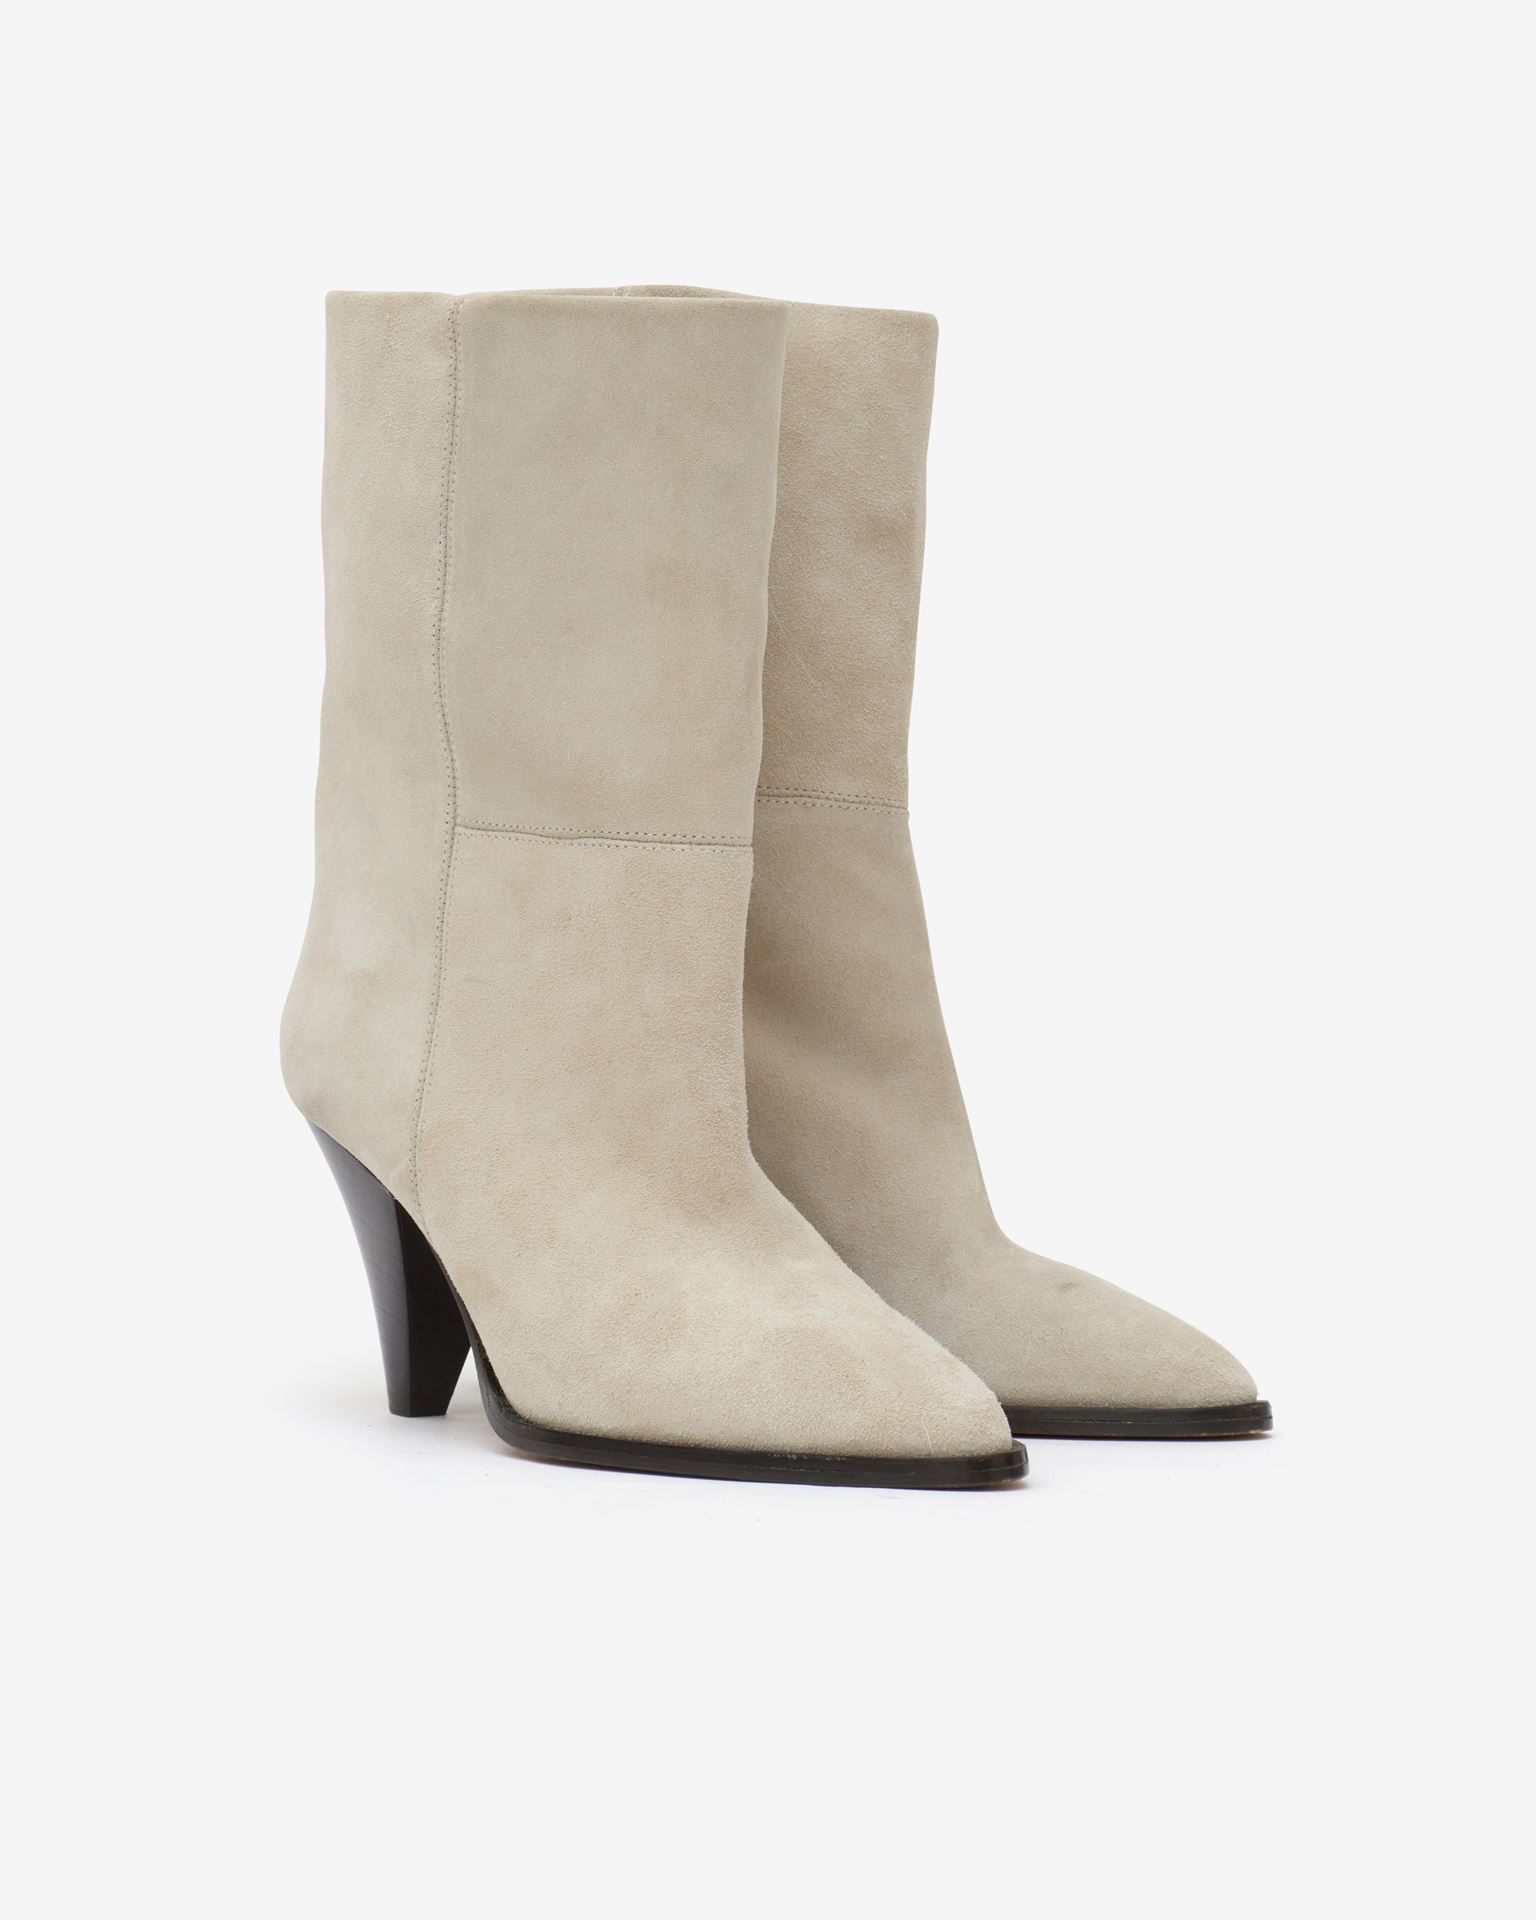 Isabel Marant, Rouxa Suede Leather Boots - Women - White